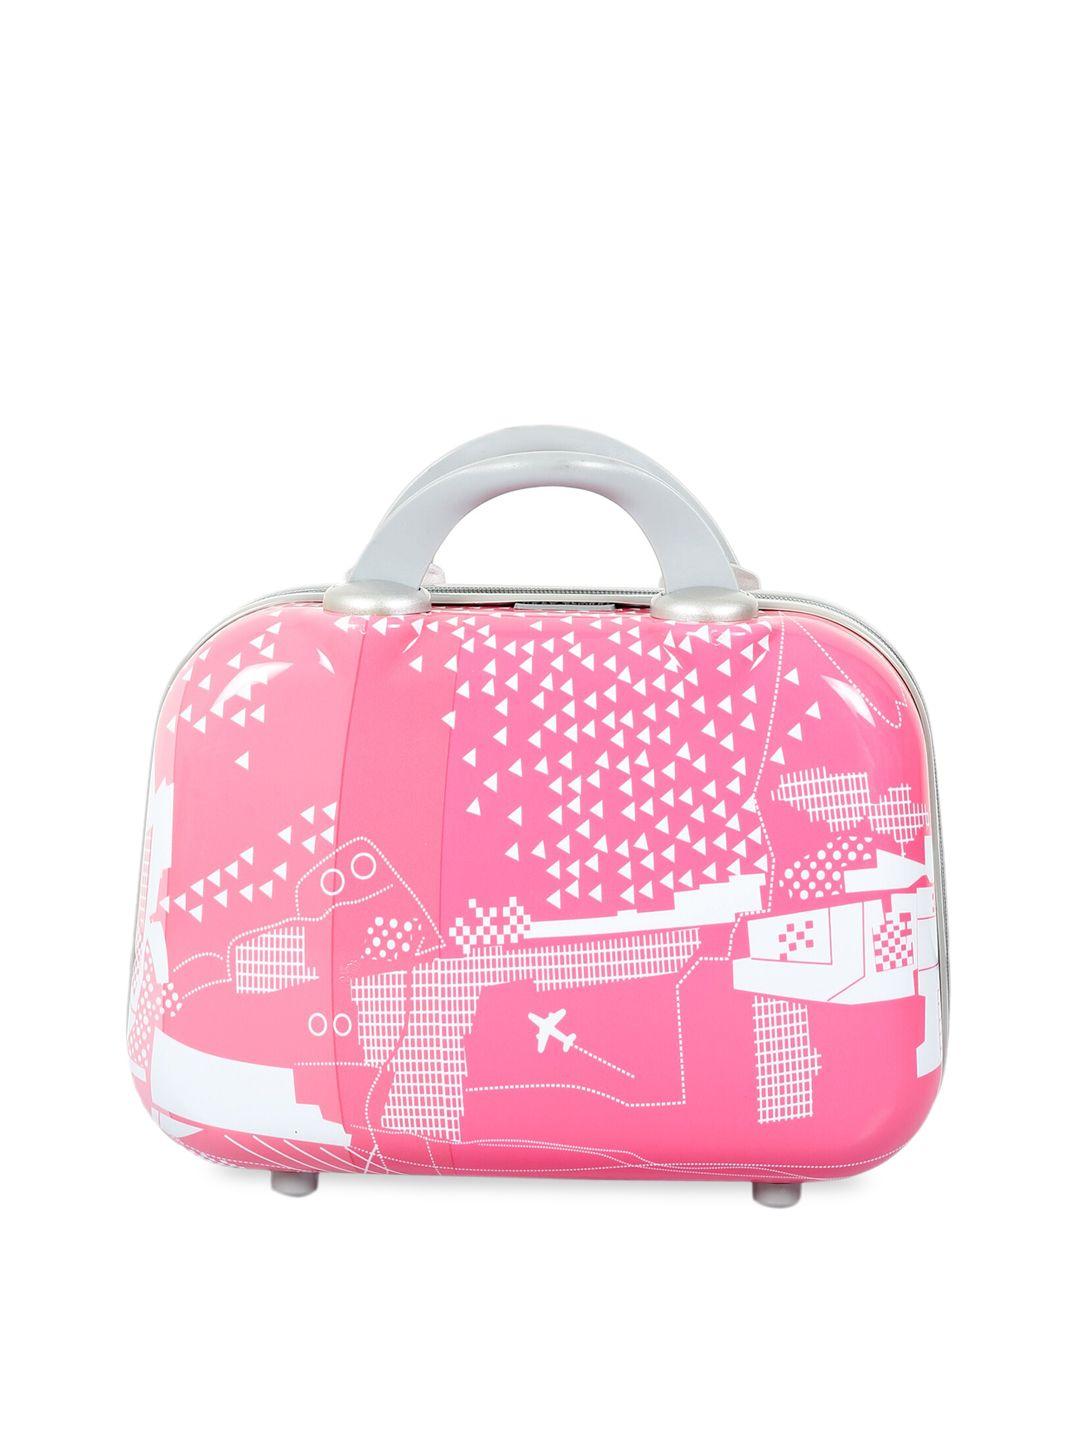 polo class pink printed hard case travel vanity bag